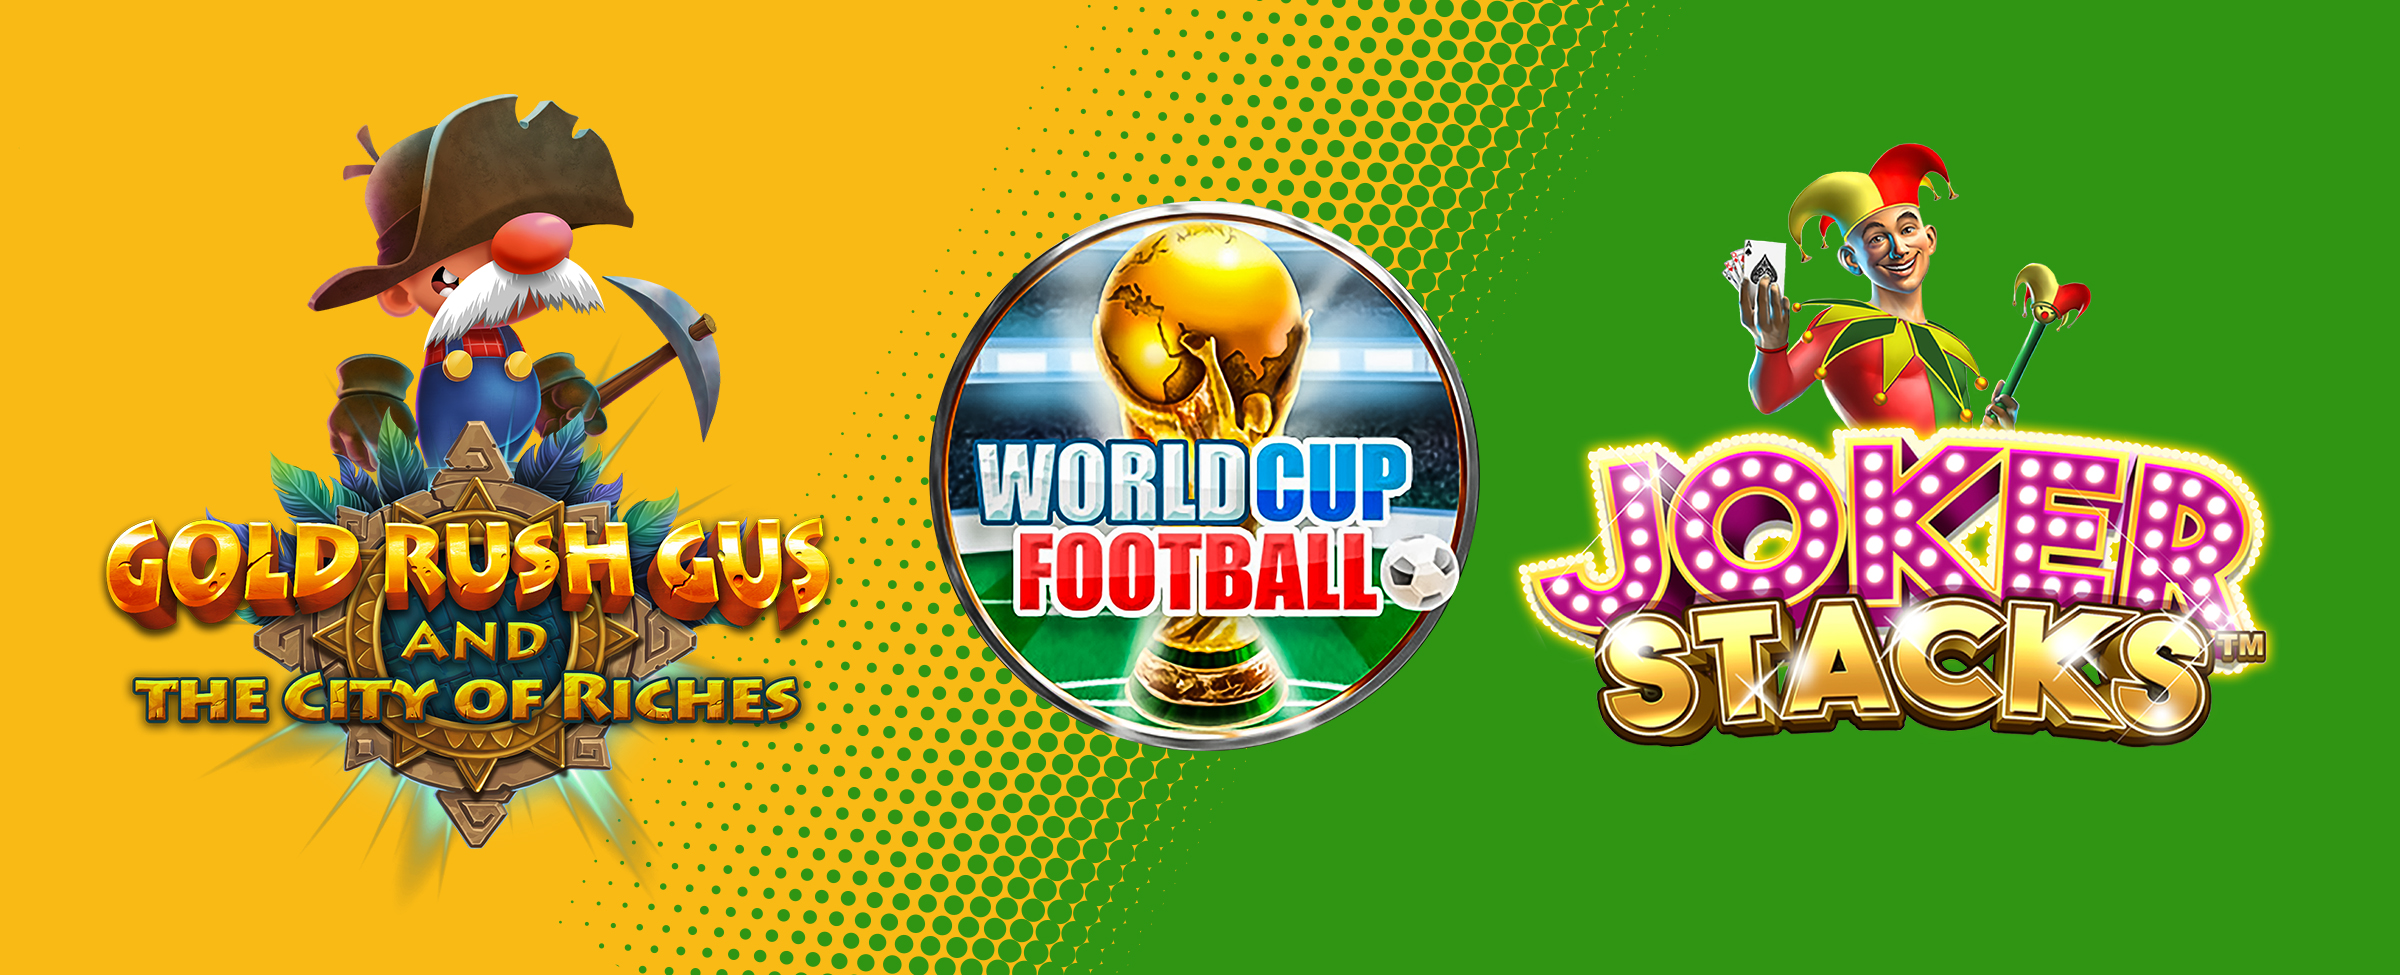 Try these hot pokies on for size: Gold Rush Gus and the City of Riches, World Cup Football, and Joker Stacks.